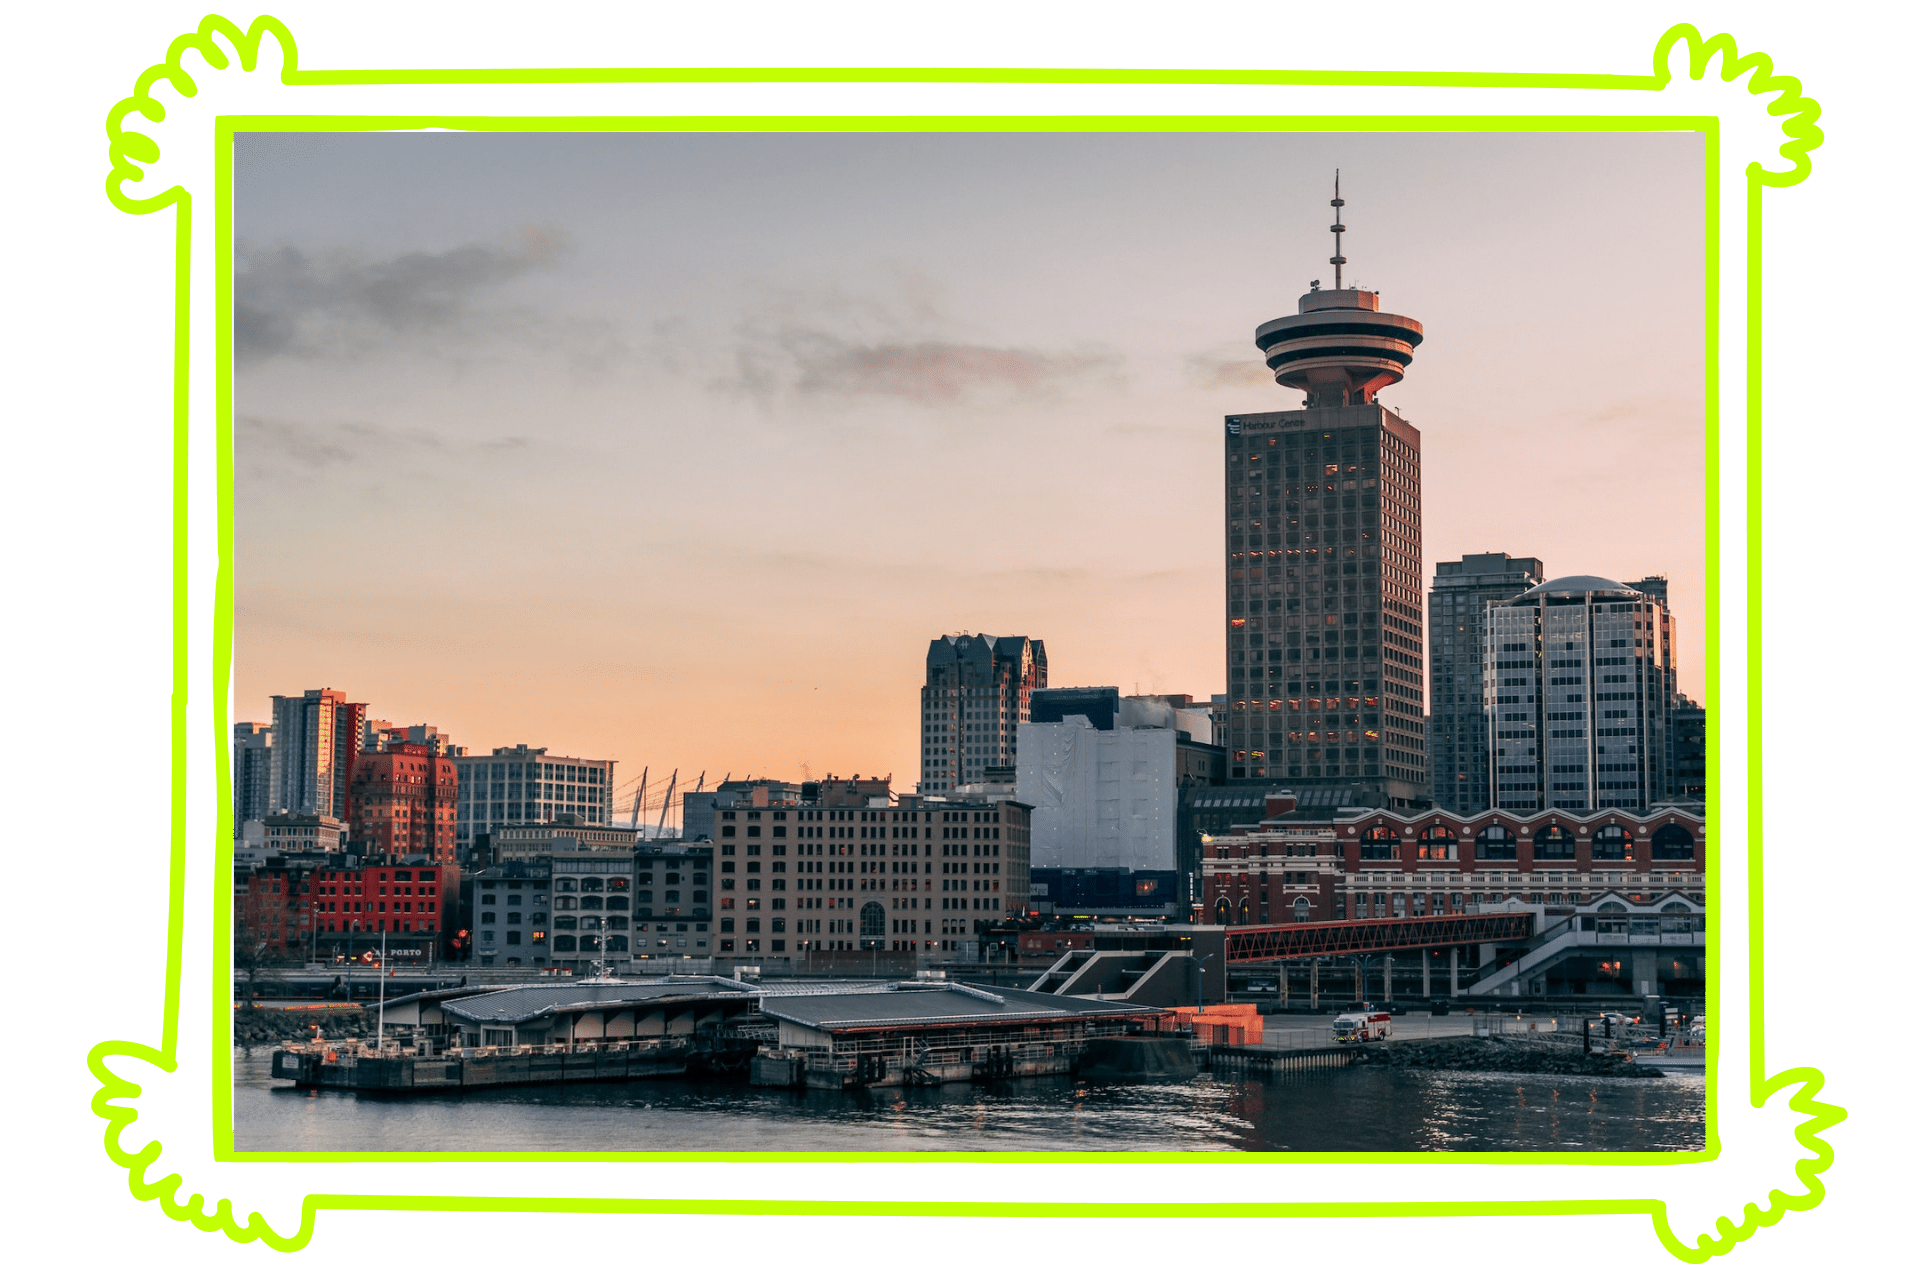 The skyline of Vancouver at sunset, with high rises lining the river.